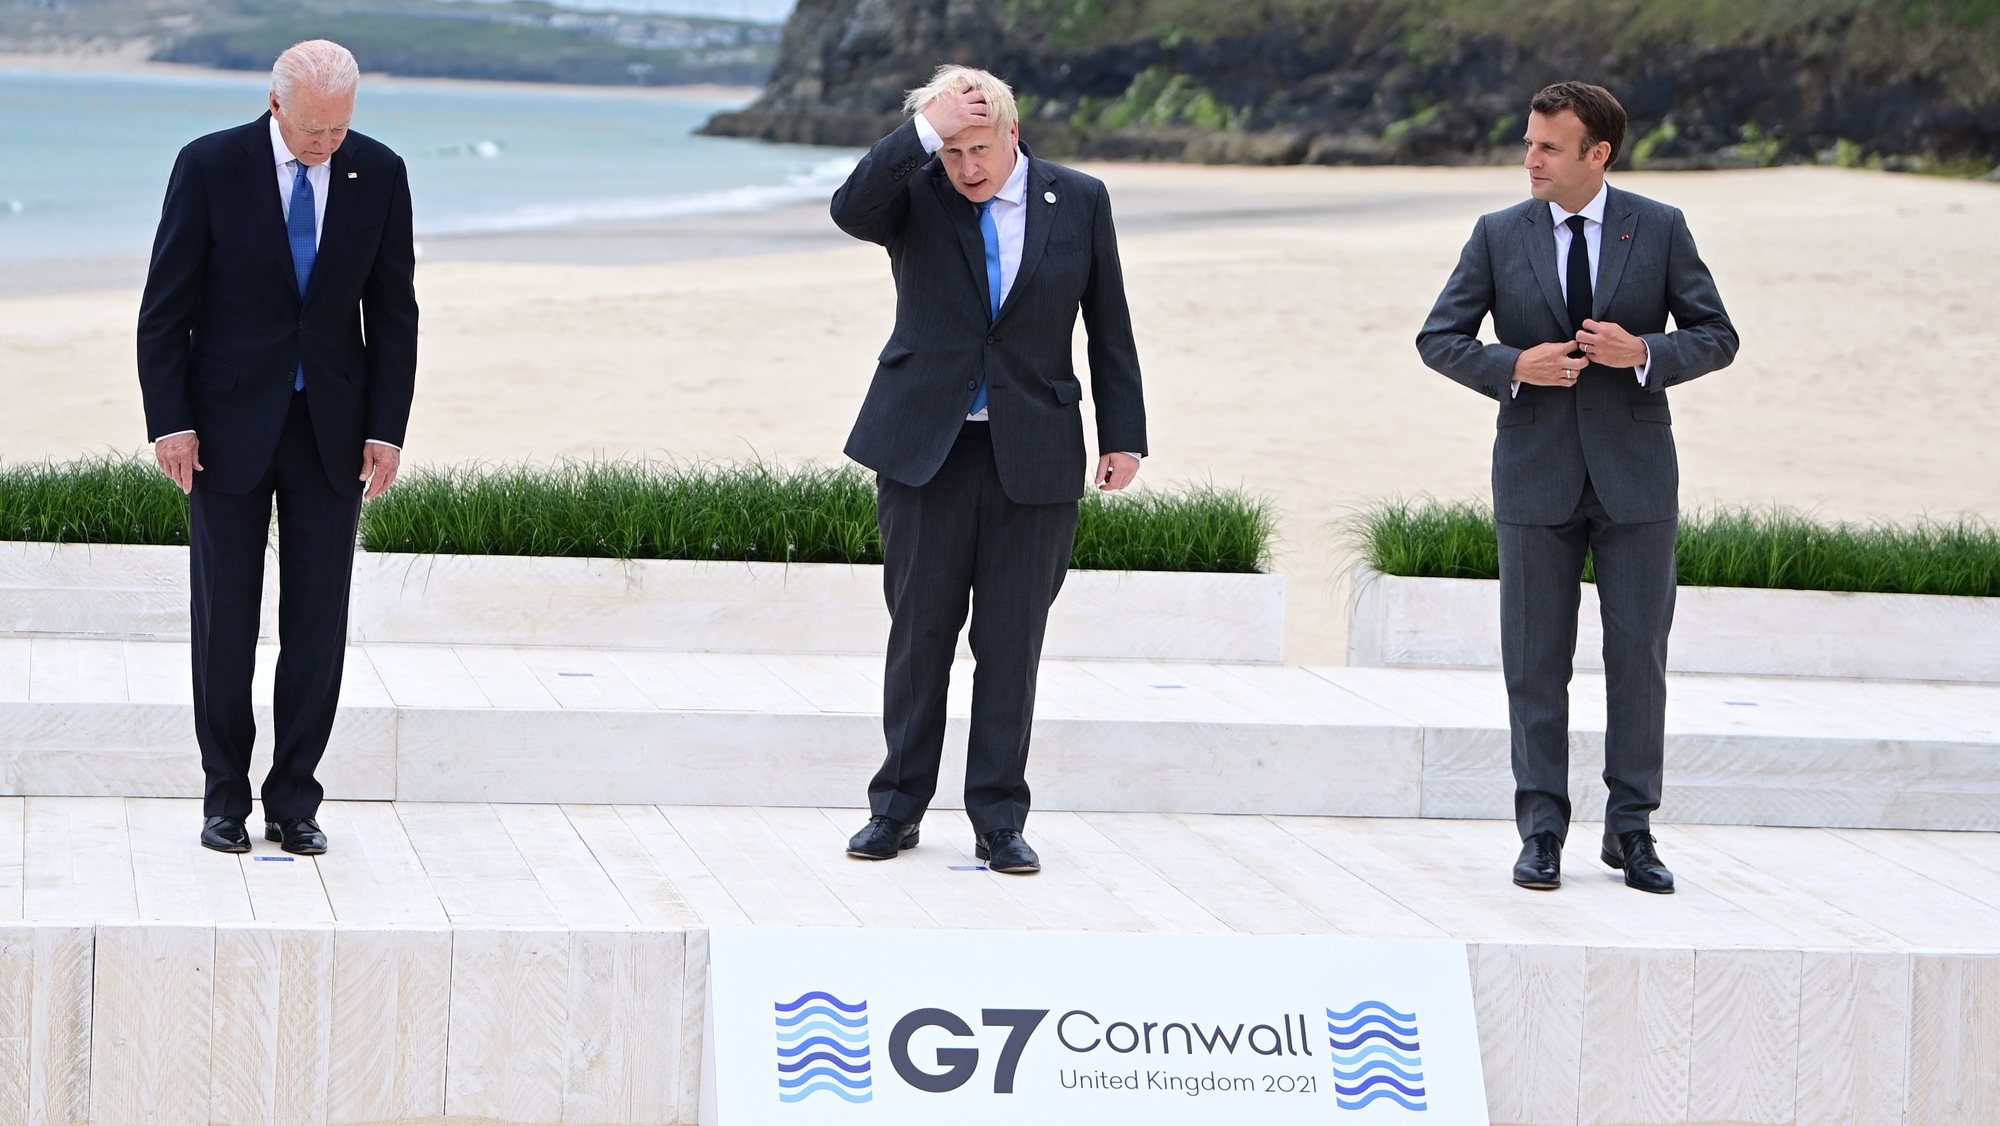 epa09262174 US President Joe Biden (L) Britain&#039;s Prime Minister Boris Johnson (C) and France&#039;s President Emanuel Macron (R) pose for the family photo during the G7 Summit in Carbis Bay, Britain, 11 June 2021. Britain will held the G7 summit in Cornwall in from 11 to 13 June 2021.  EPA/NEIL HALL/INTERNATIONAL POOL